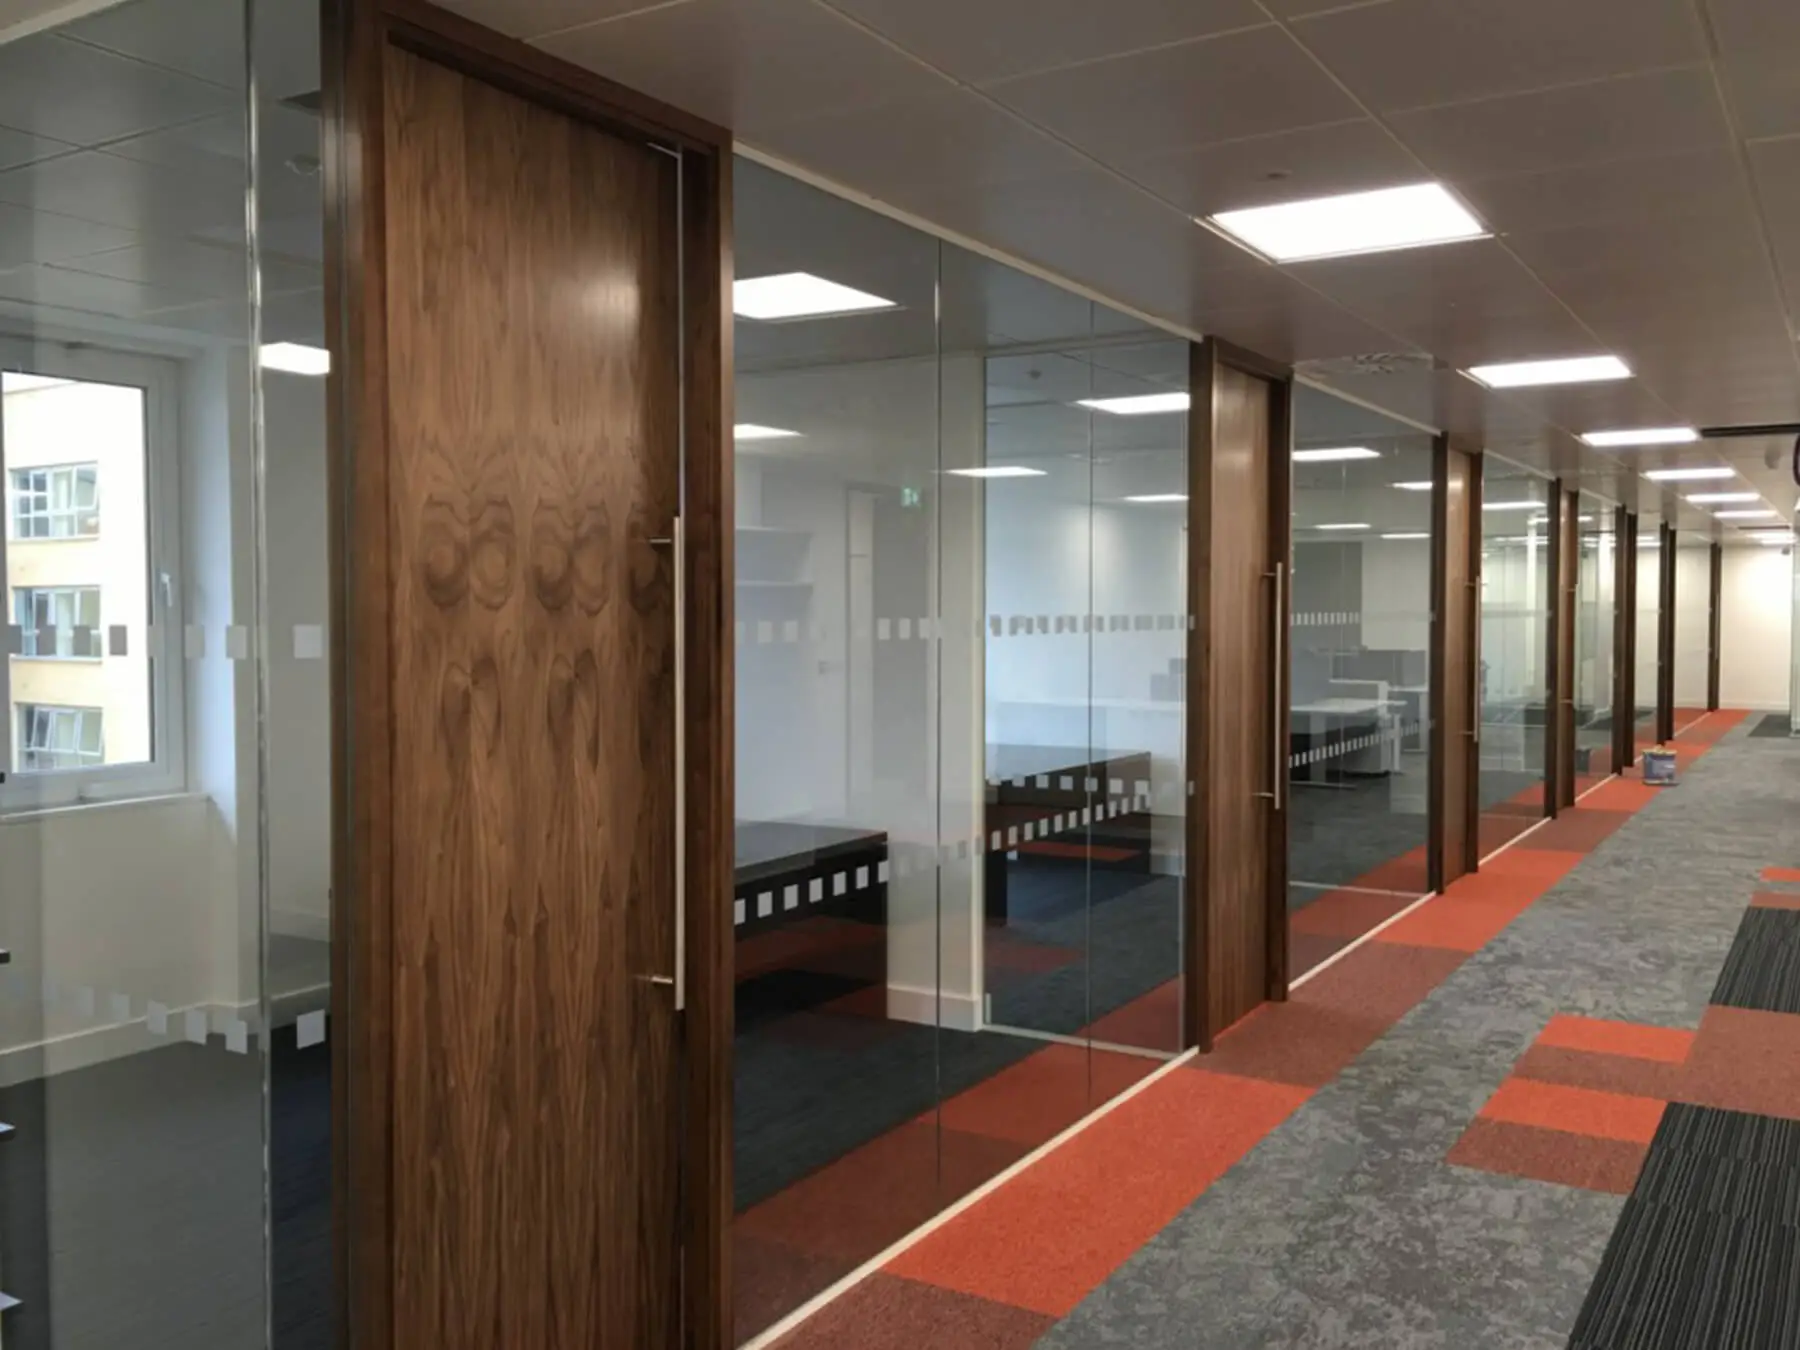 Single glaze partitions with solid doors with full height handles